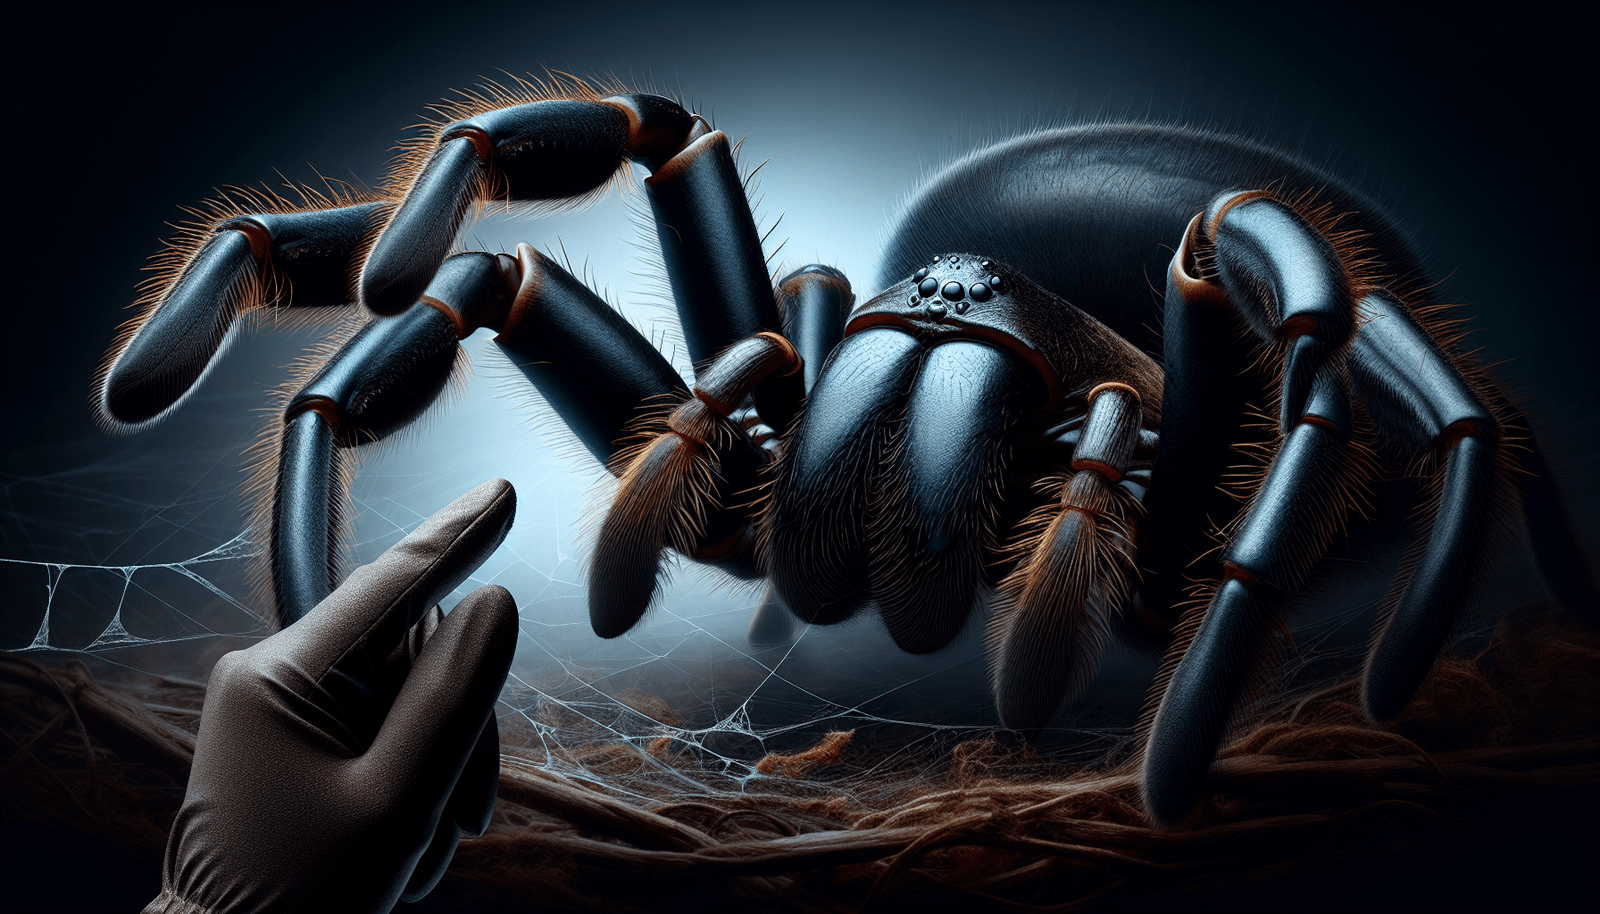 How Do You Handle And Care For The Elusive And Venomous Sydney Funnel-web Spider?